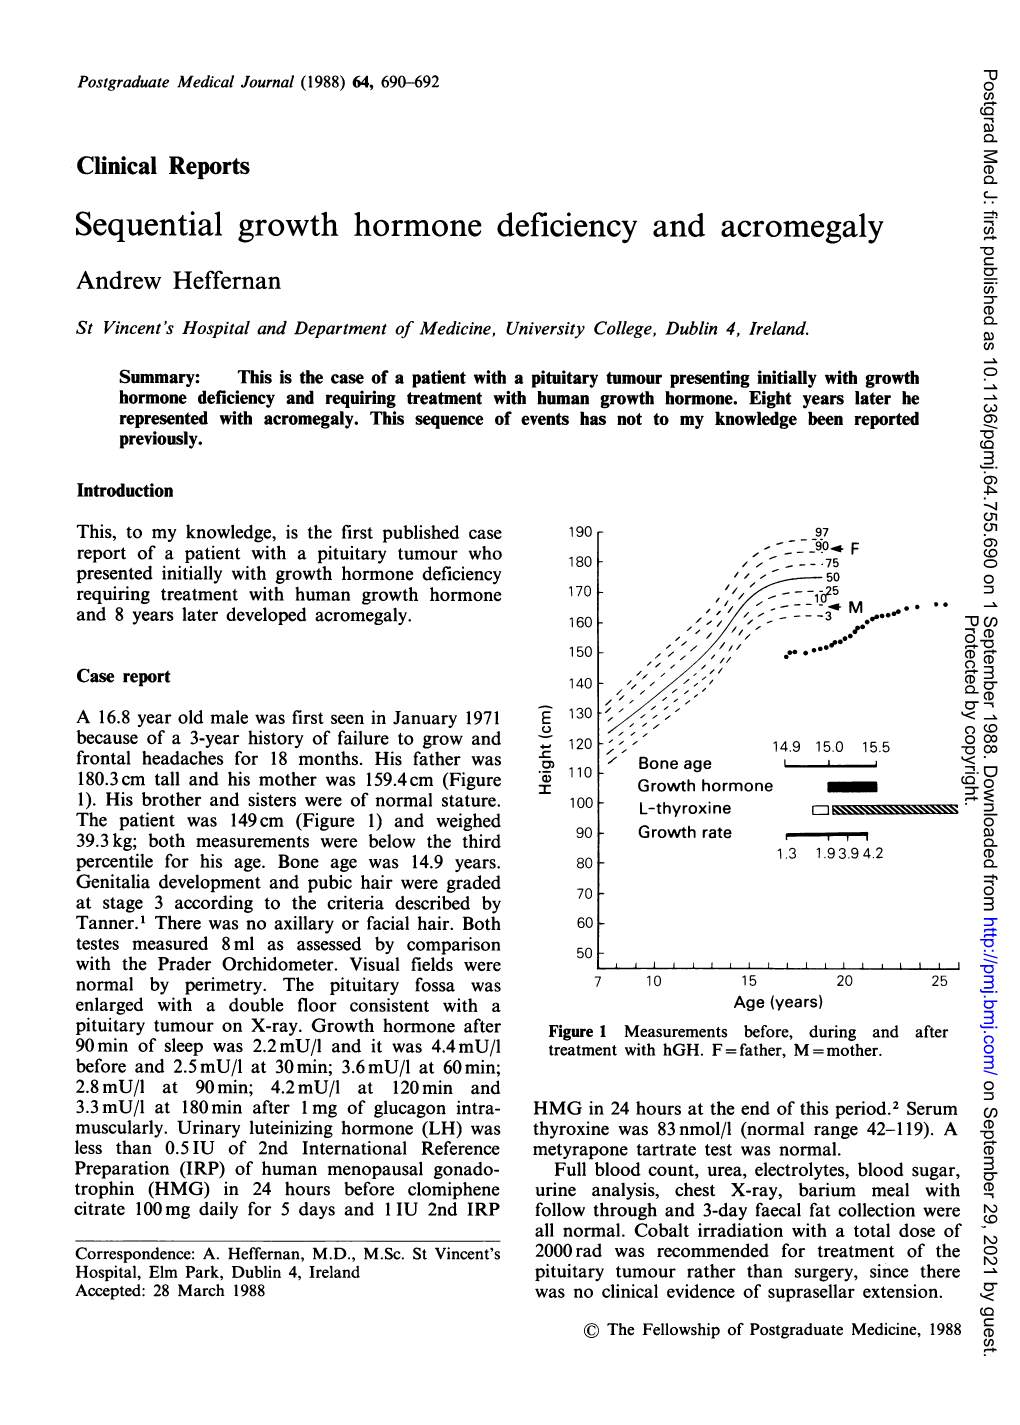 Sequential Growth Hormone Deficiency and Acromegaly Andrew Heffernan St Vincent's Hospital and Department of Medicine, University College, Dublin 4, Ireland